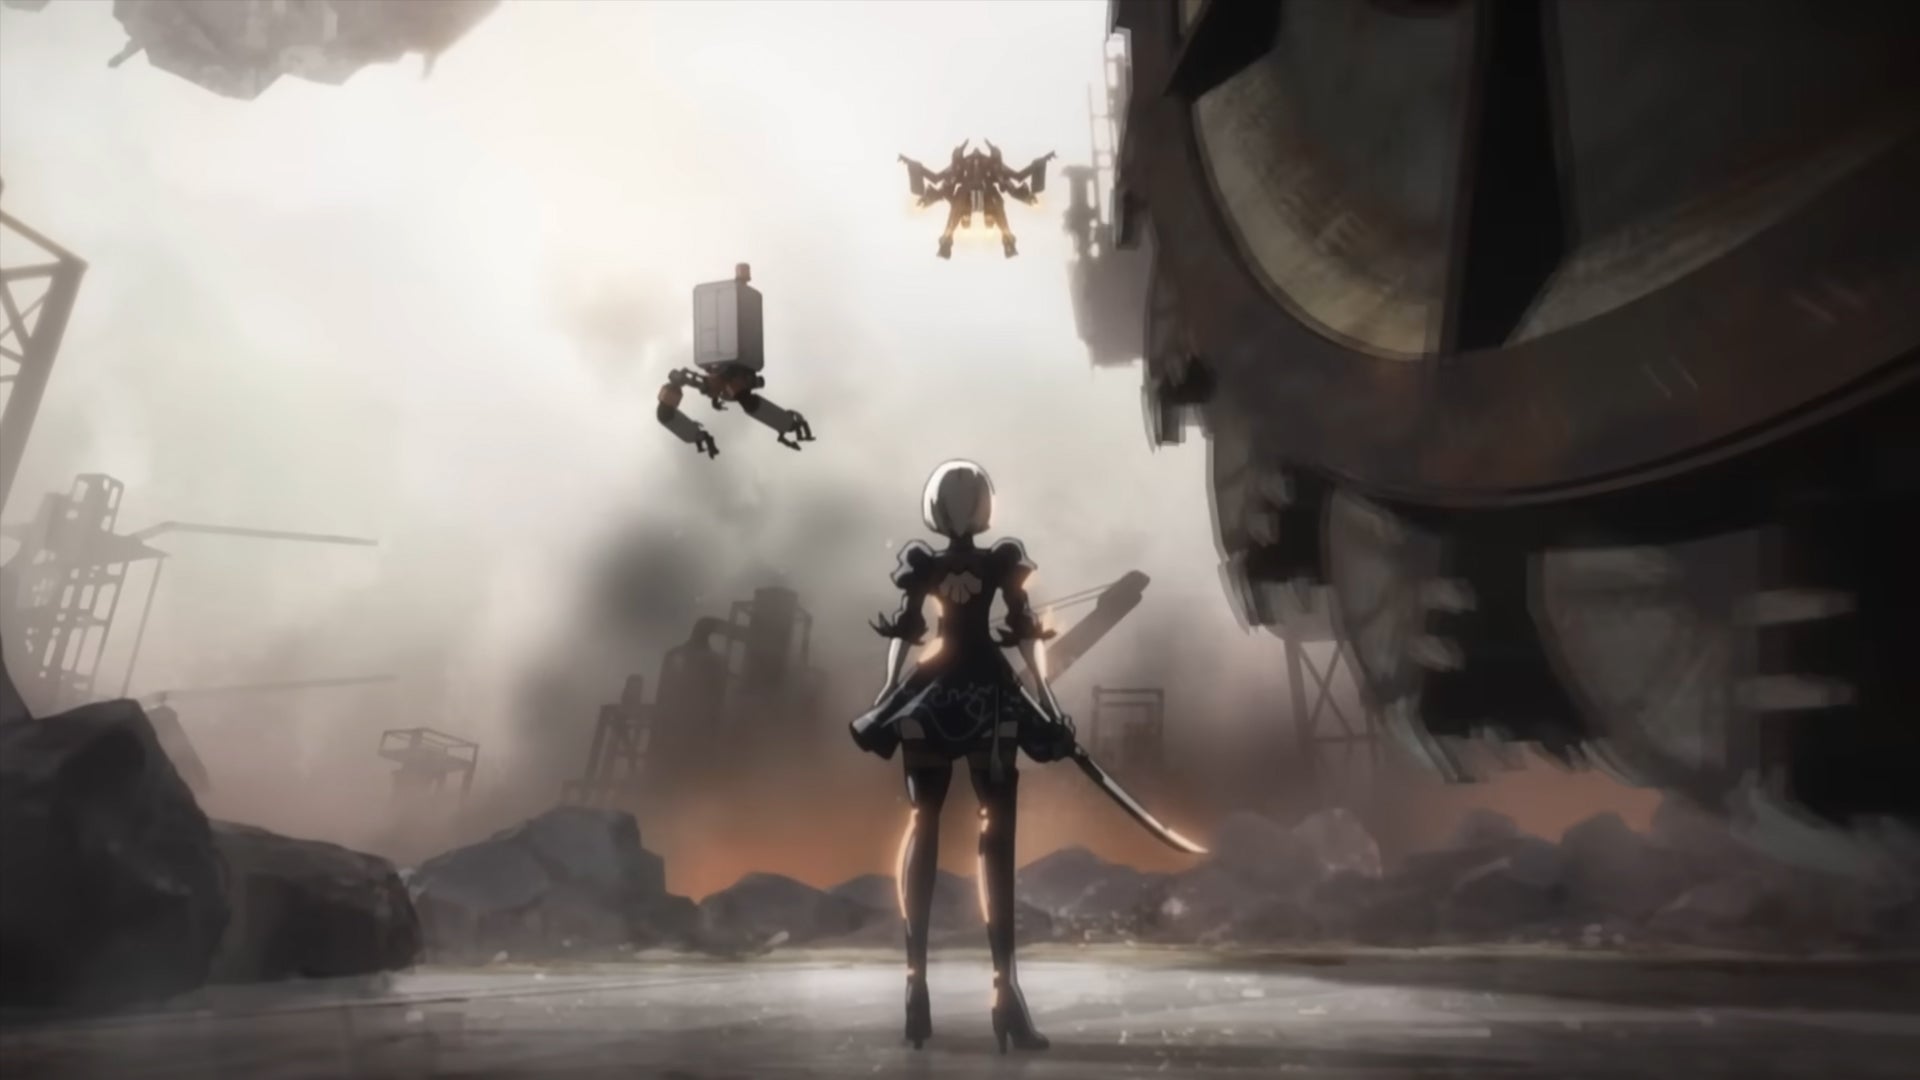 NieR Automata Anime Merchandise and Clothes Are 10% Off - Siliconera